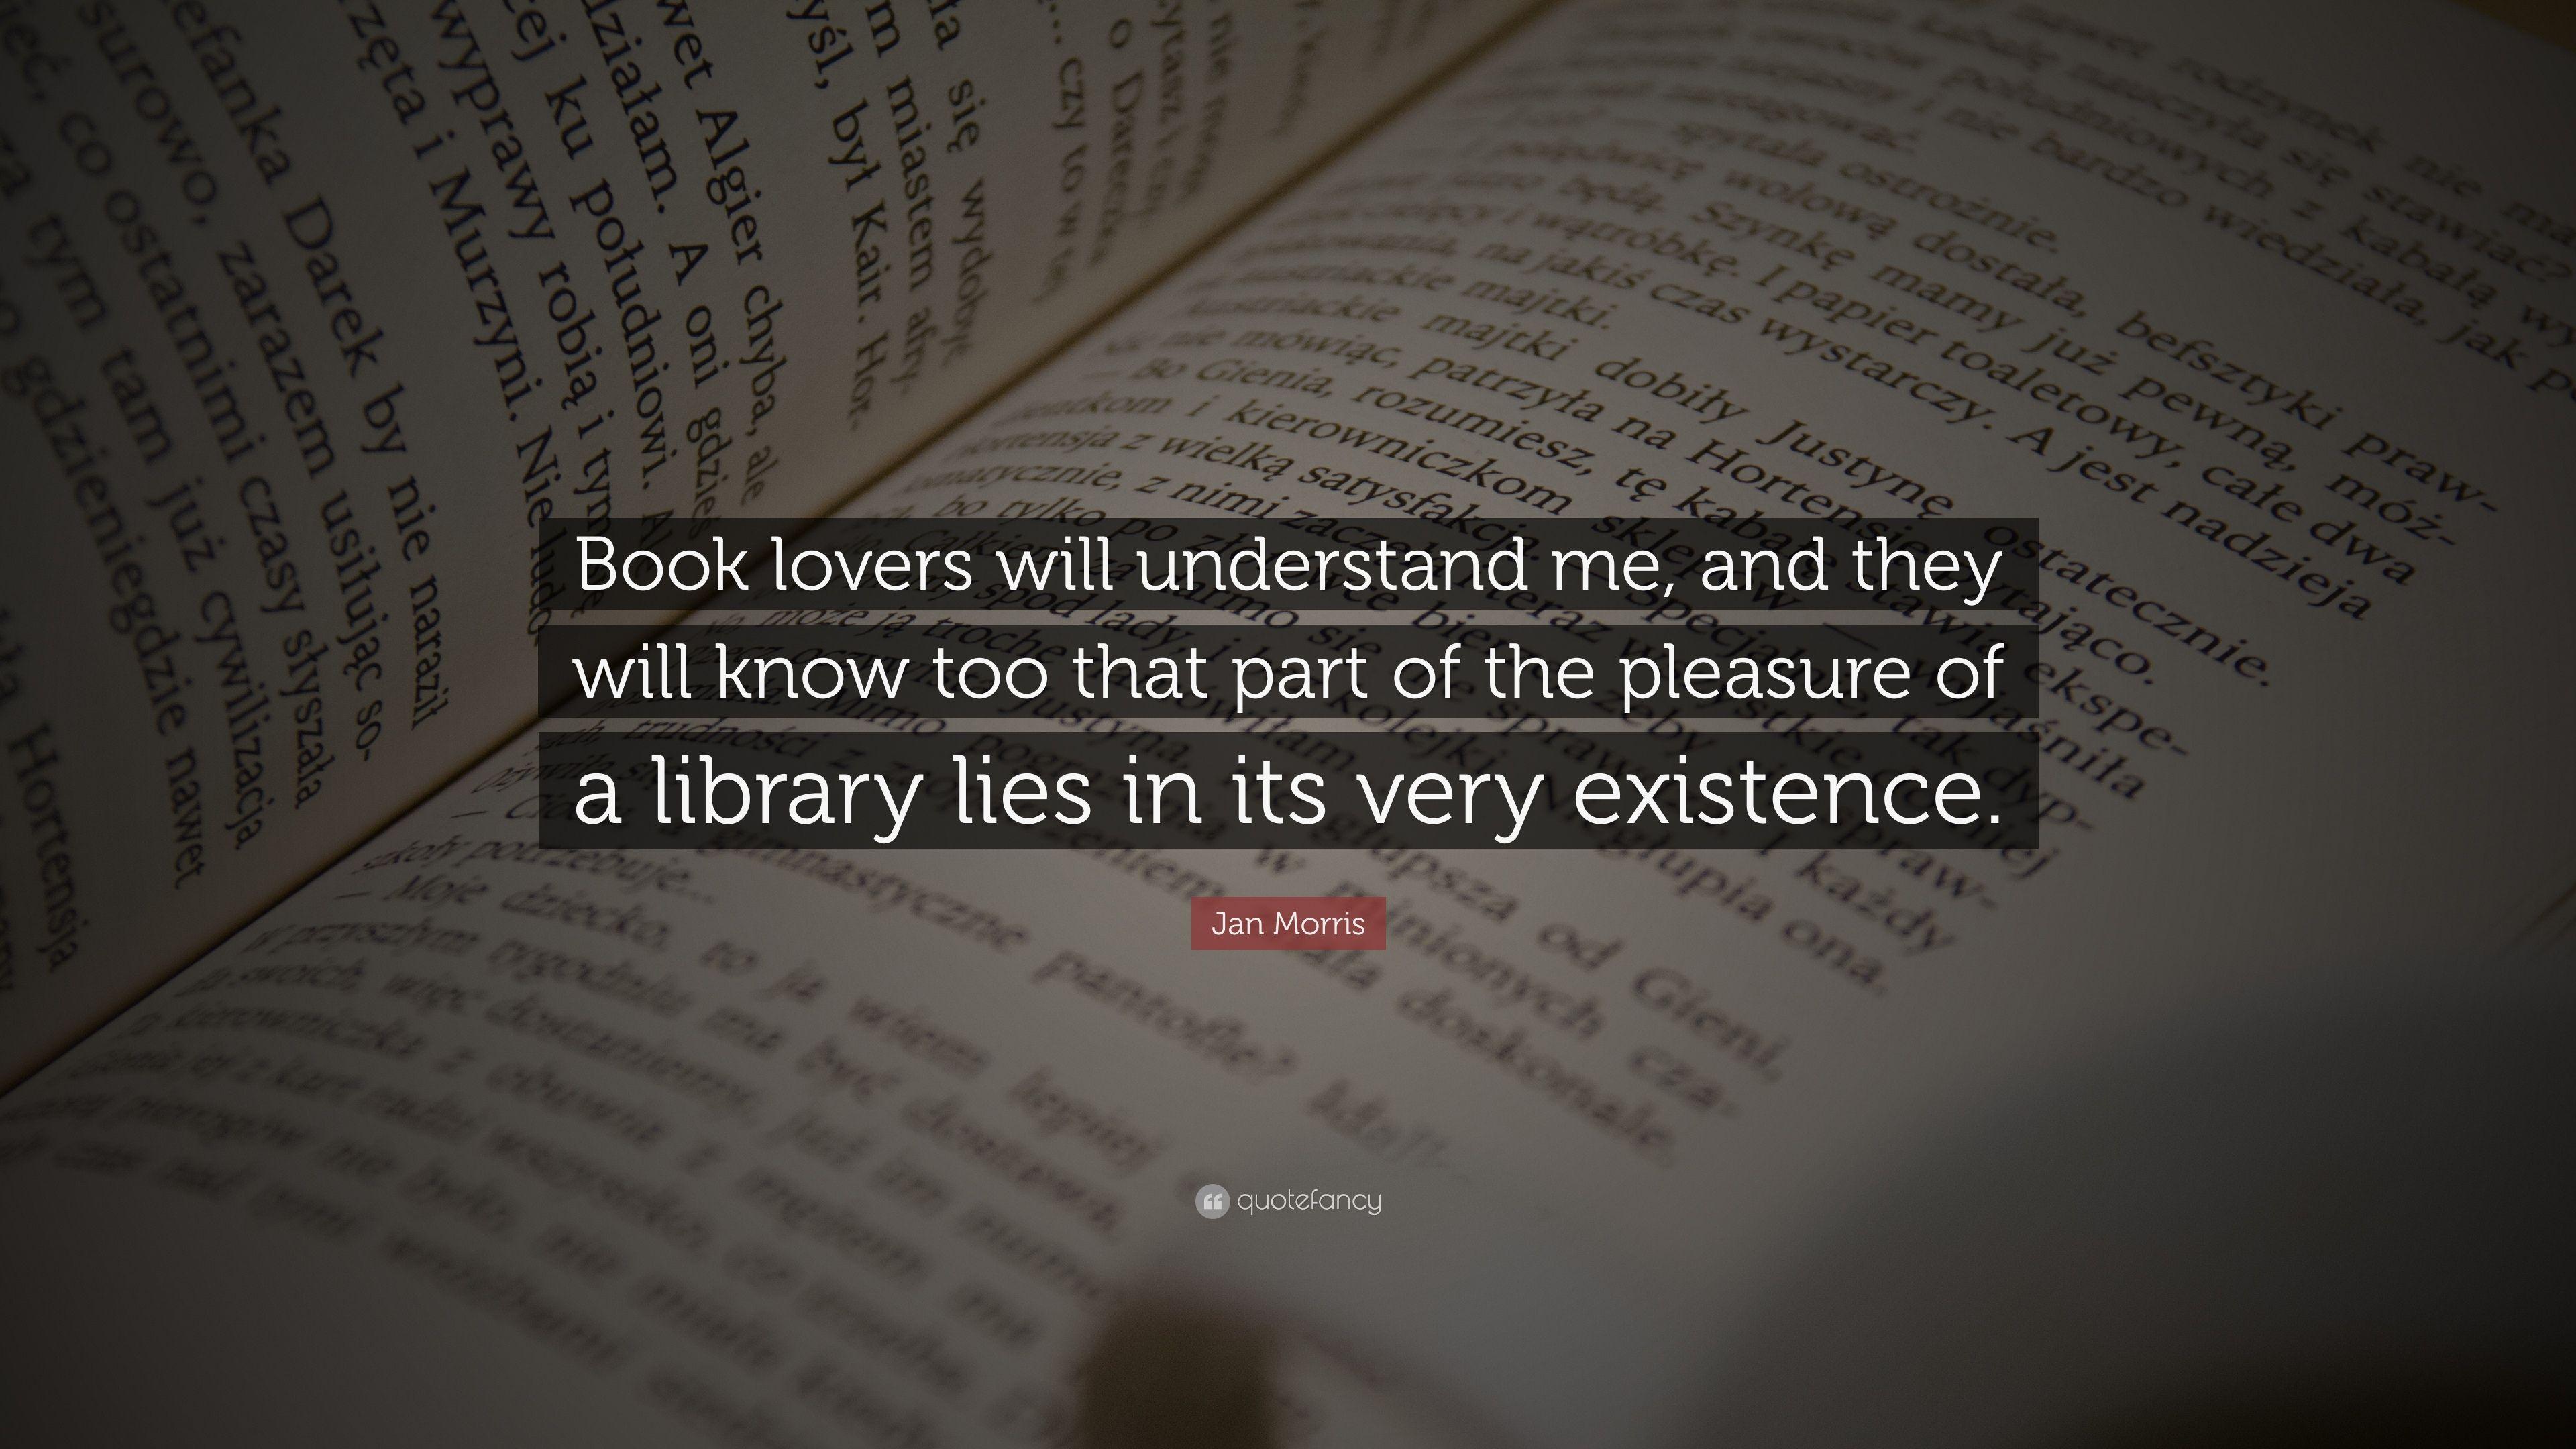 Jan Morris Quote: “Book lovers will understand me, and they will